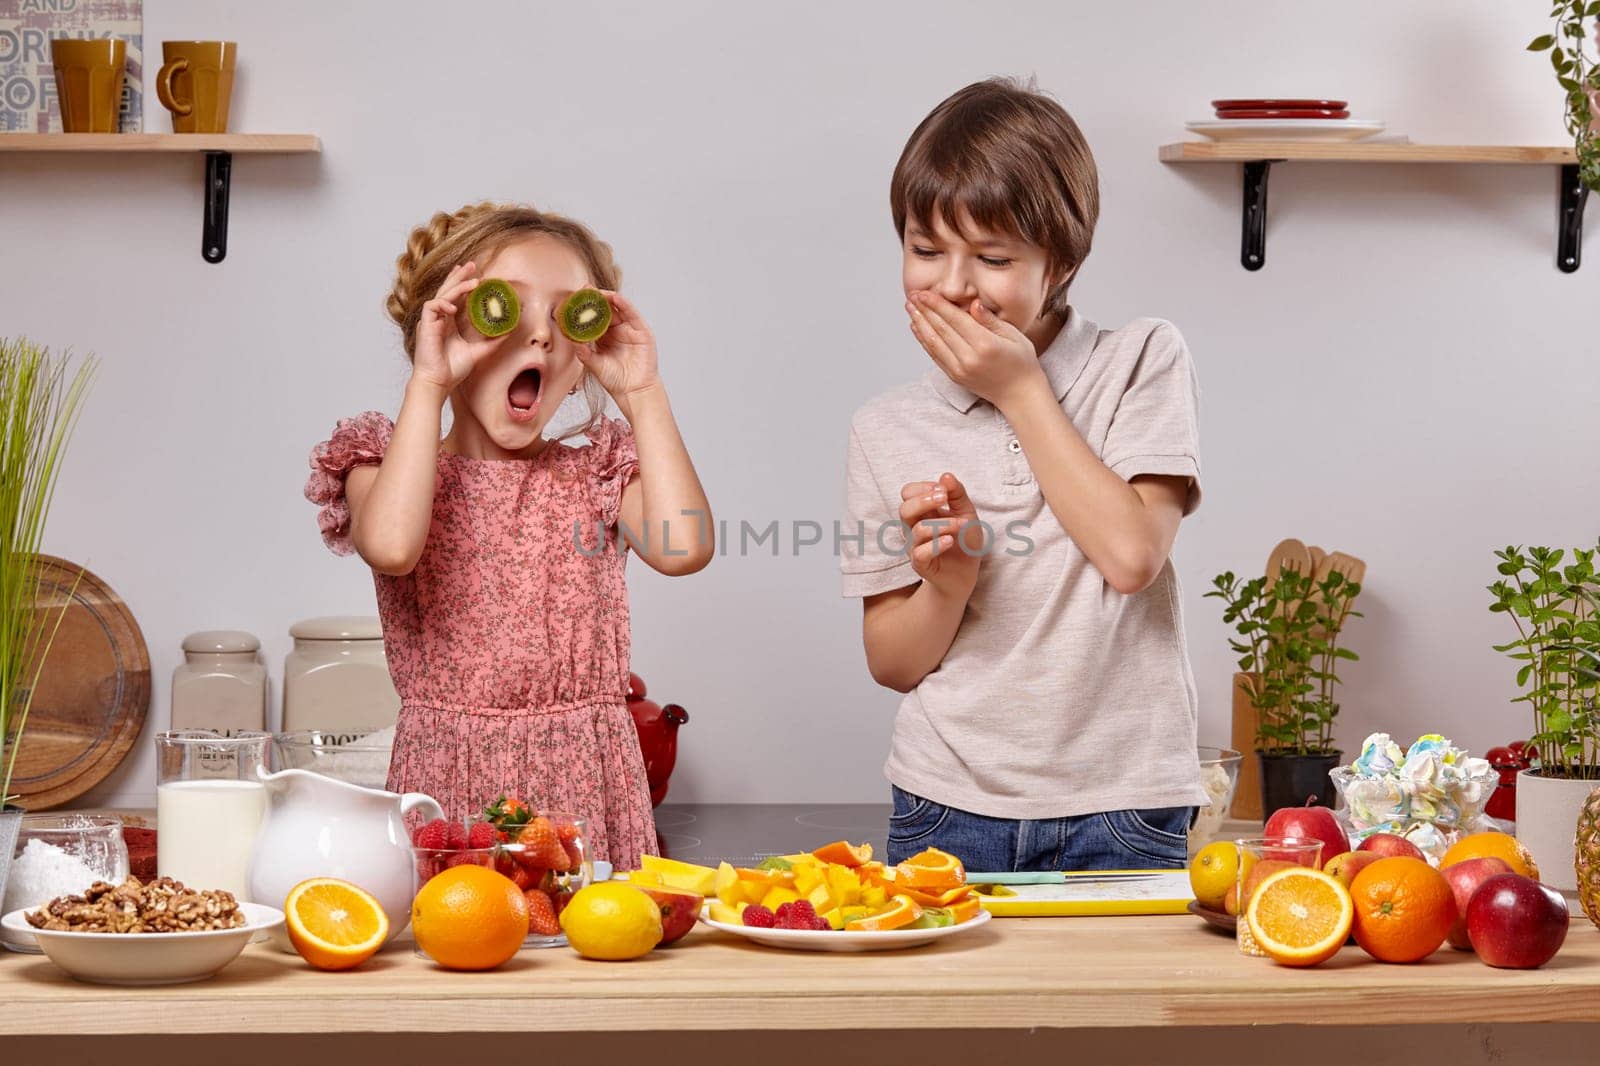 Cute cook couple. Boy with brown hair dressed in a light t-shirt and jeans with a little girl dressed in a pink dress with a braid in her hairstyle are at a kitchen against a white wall with shelves on it. Girl is holding a kiwi as if it were her eyes and opened her mouth widely and boy is laughing at her.